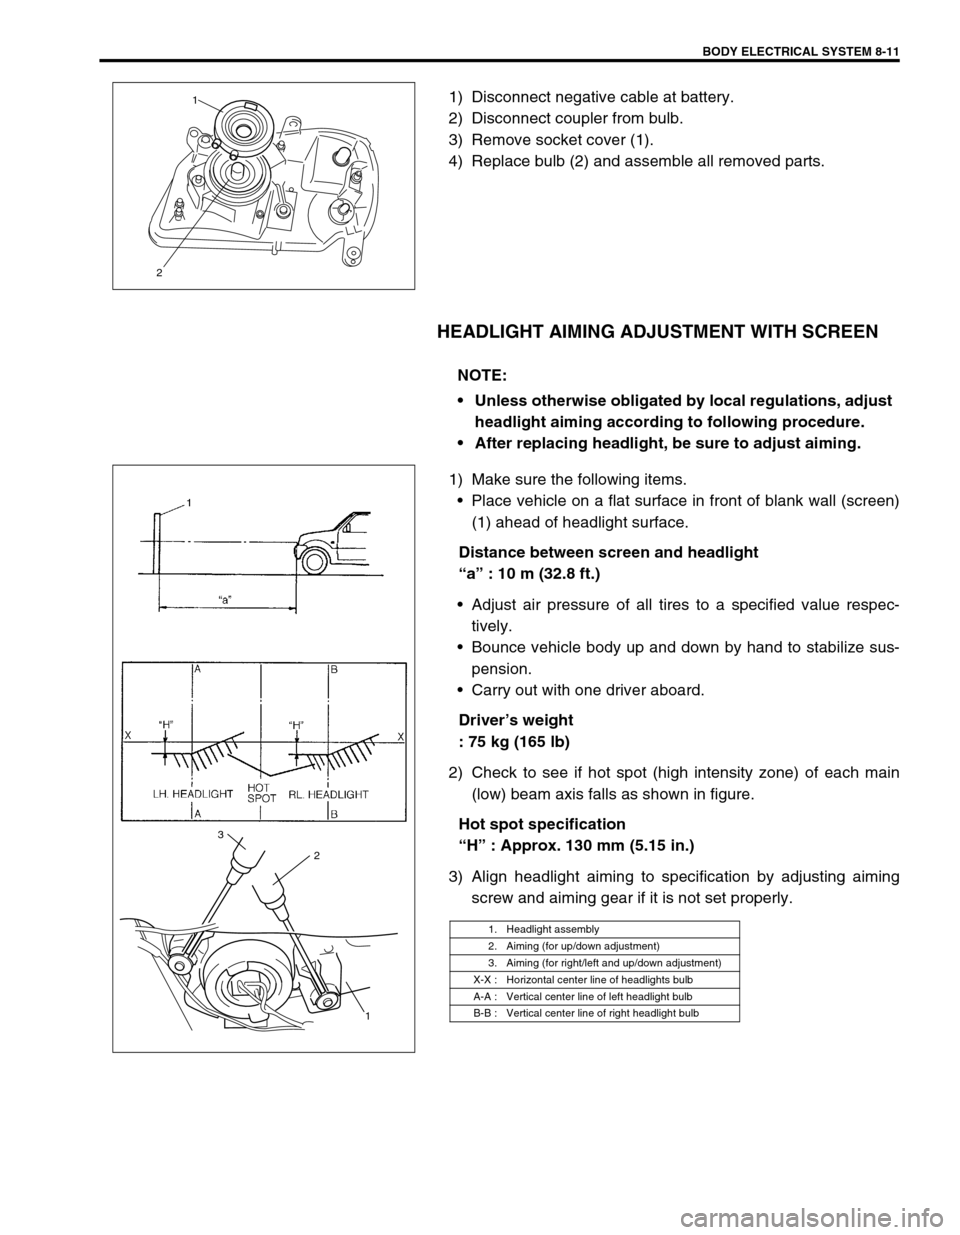 SUZUKI SWIFT 2000 1.G Transmission Service Workshop Manual BODY ELECTRICAL SYSTEM 8-11
1) Disconnect negative cable at battery.
2) Disconnect coupler from bulb.
3) Remove socket cover (1).
4) Replace bulb (2) and assemble all removed parts.
HEADLIGHT AIMING A